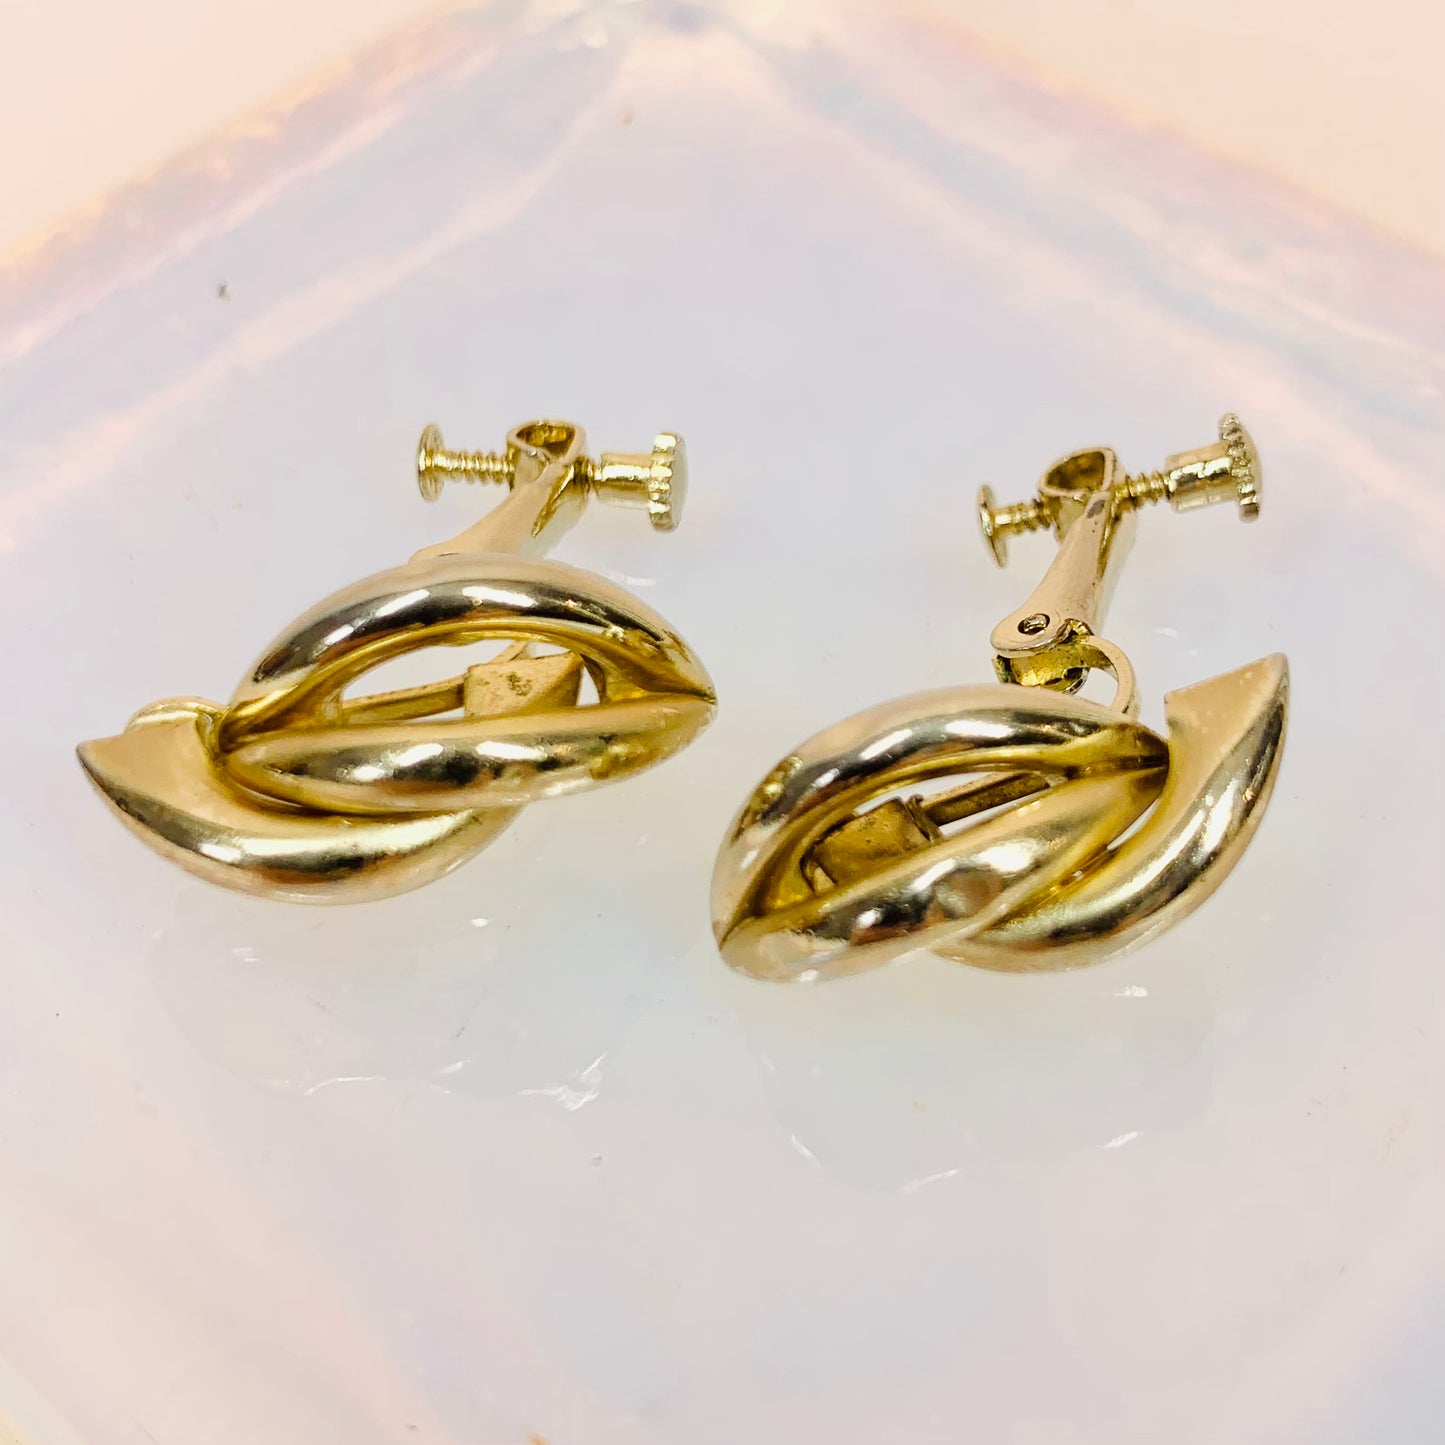 Rare gold plated stud earrings